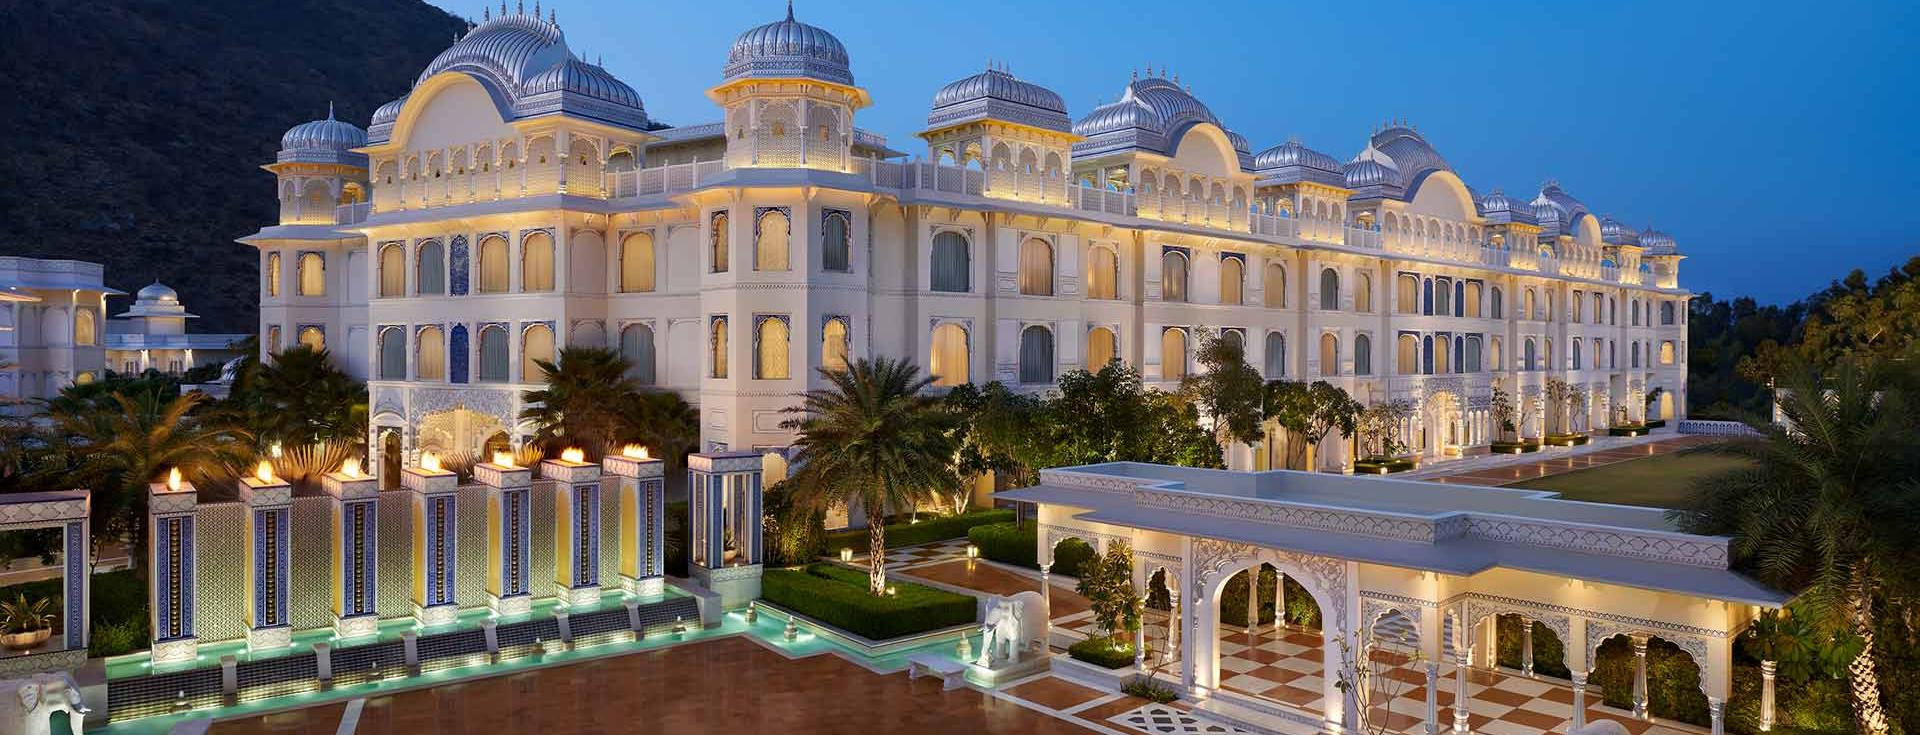 THE LEELA PALACES, HOTELS AND RESORTS MAKES A DEBUT IN RAJASTHAN’S CAPITAL CITY WITH THE UNVEILING OF THE LEELA PALACE JAIPUR